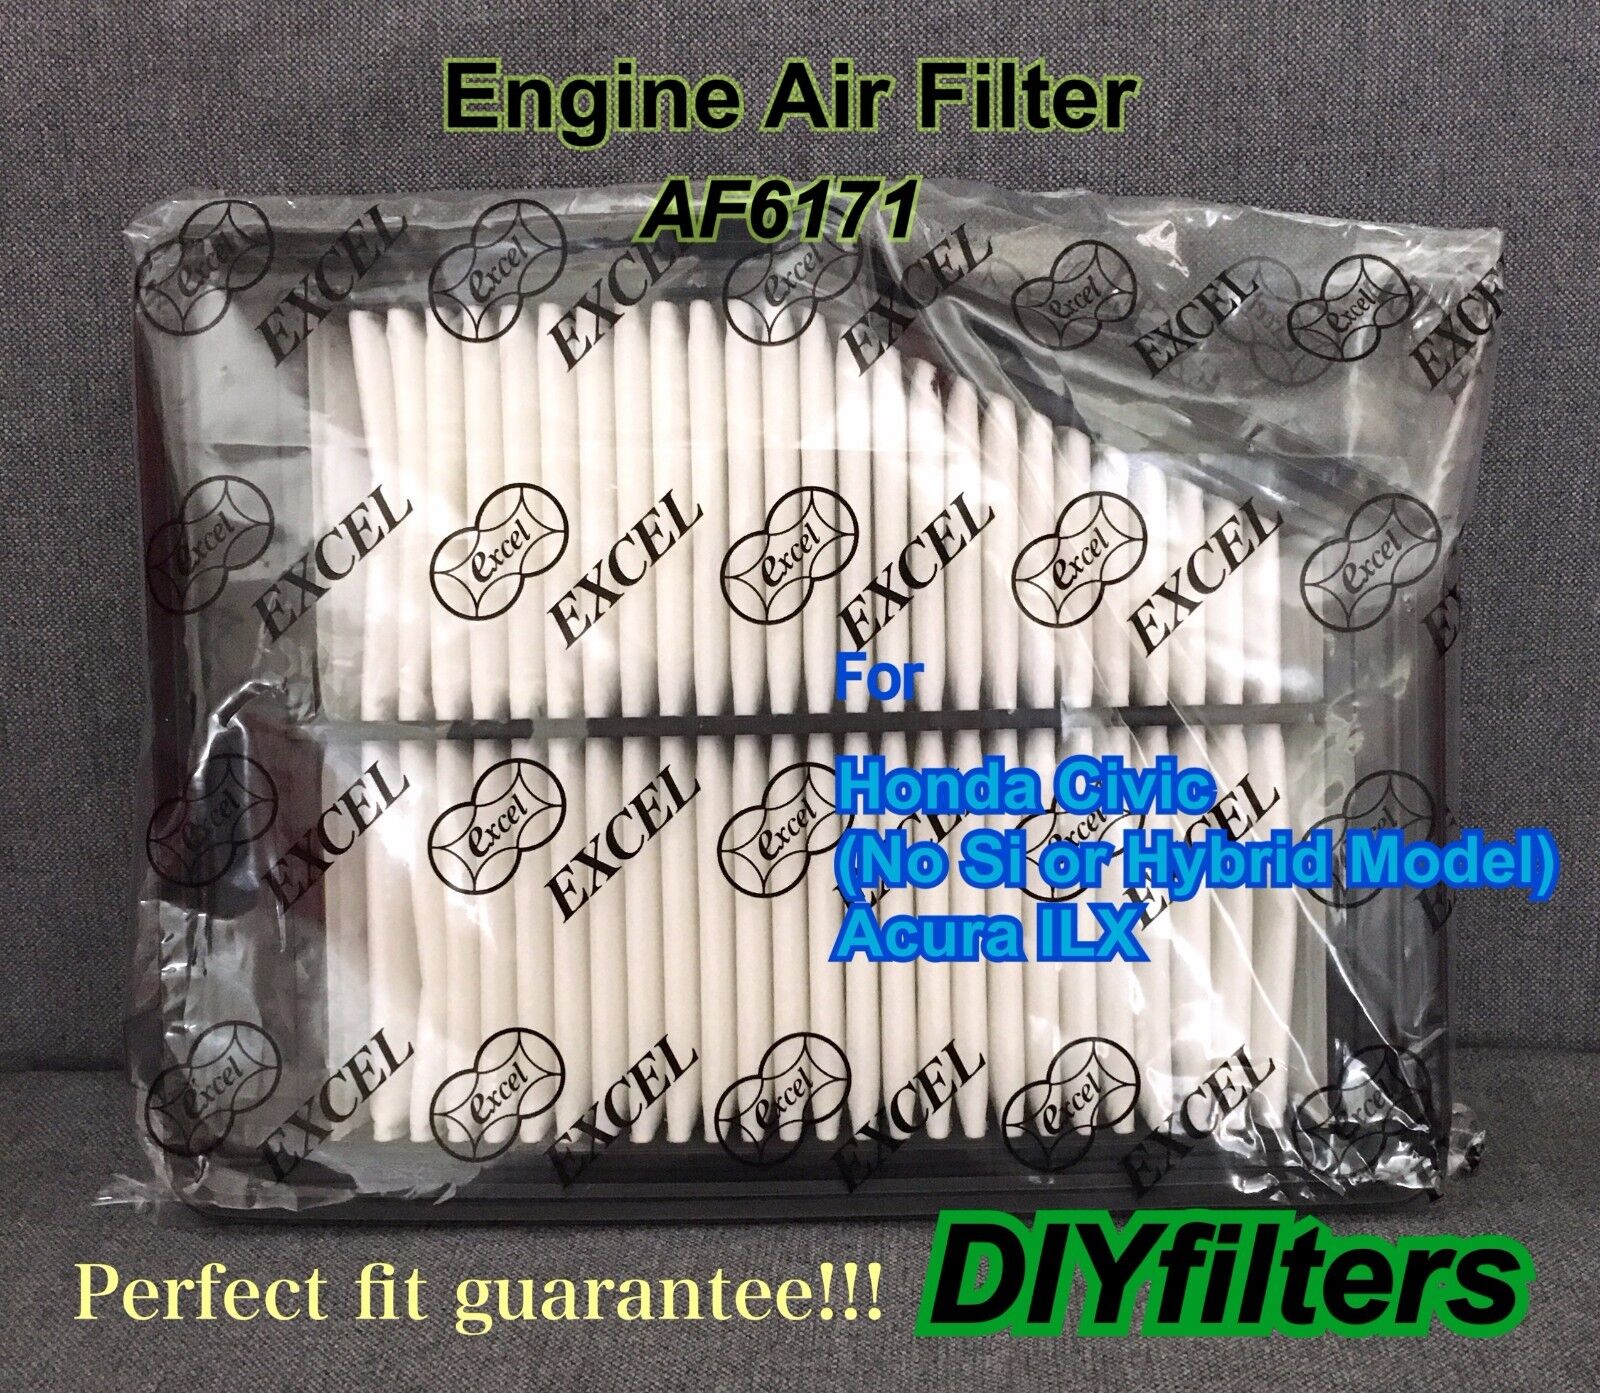 Engine Air Filter For Acura ILX 2013-15 AF6171 Fast Ship